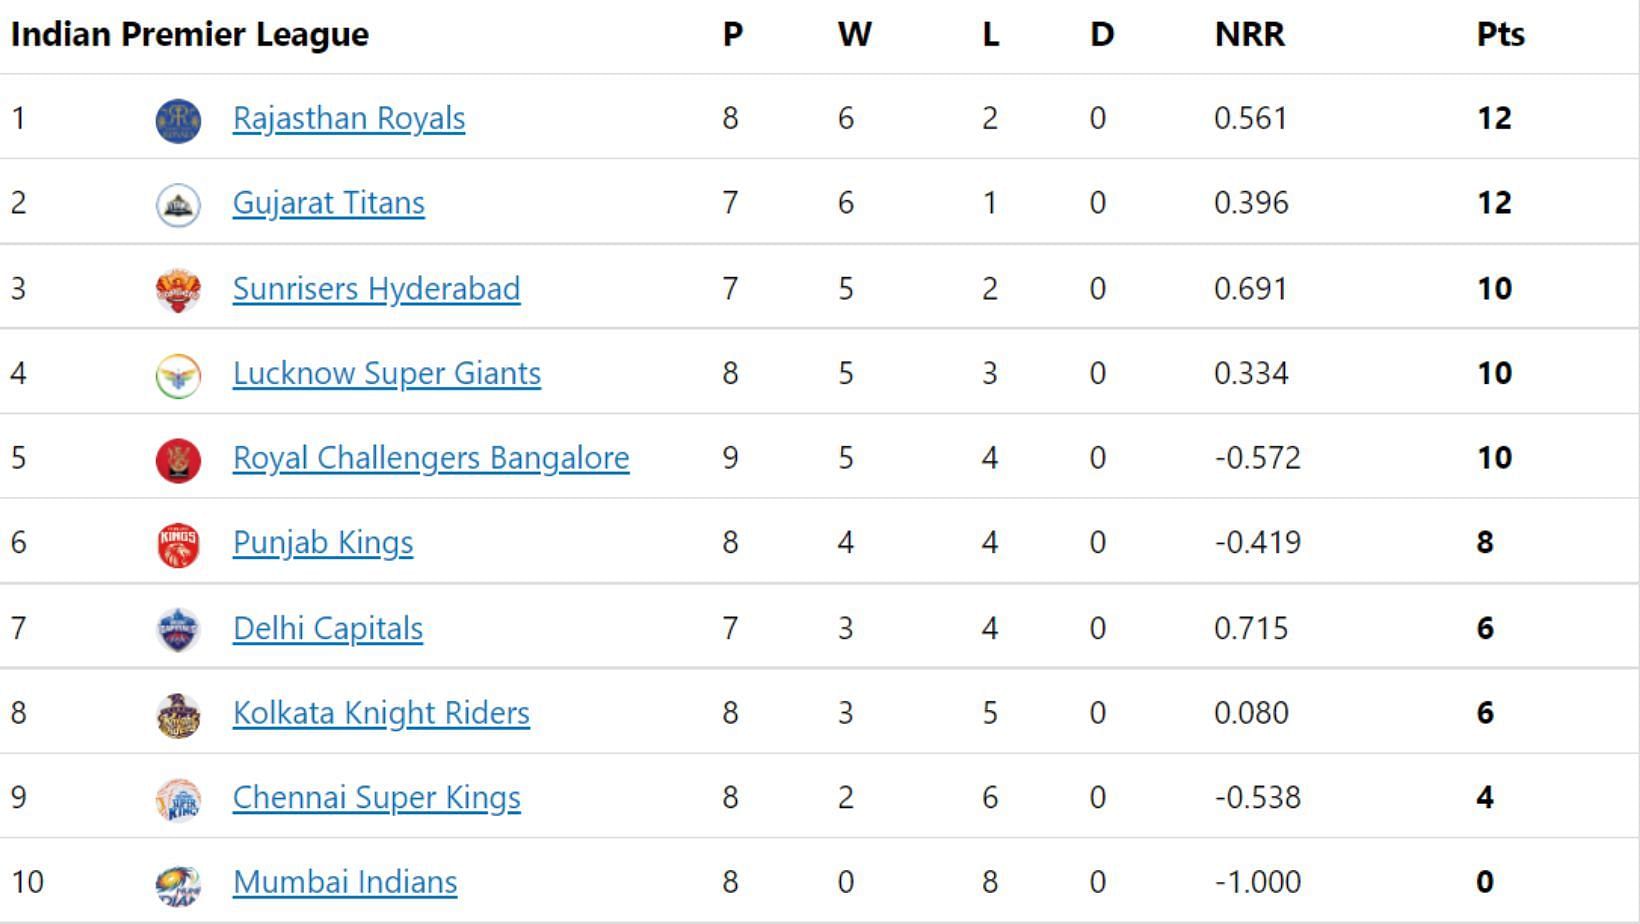 Rajasthan Royals move to the top of the IPL 2022 points table.